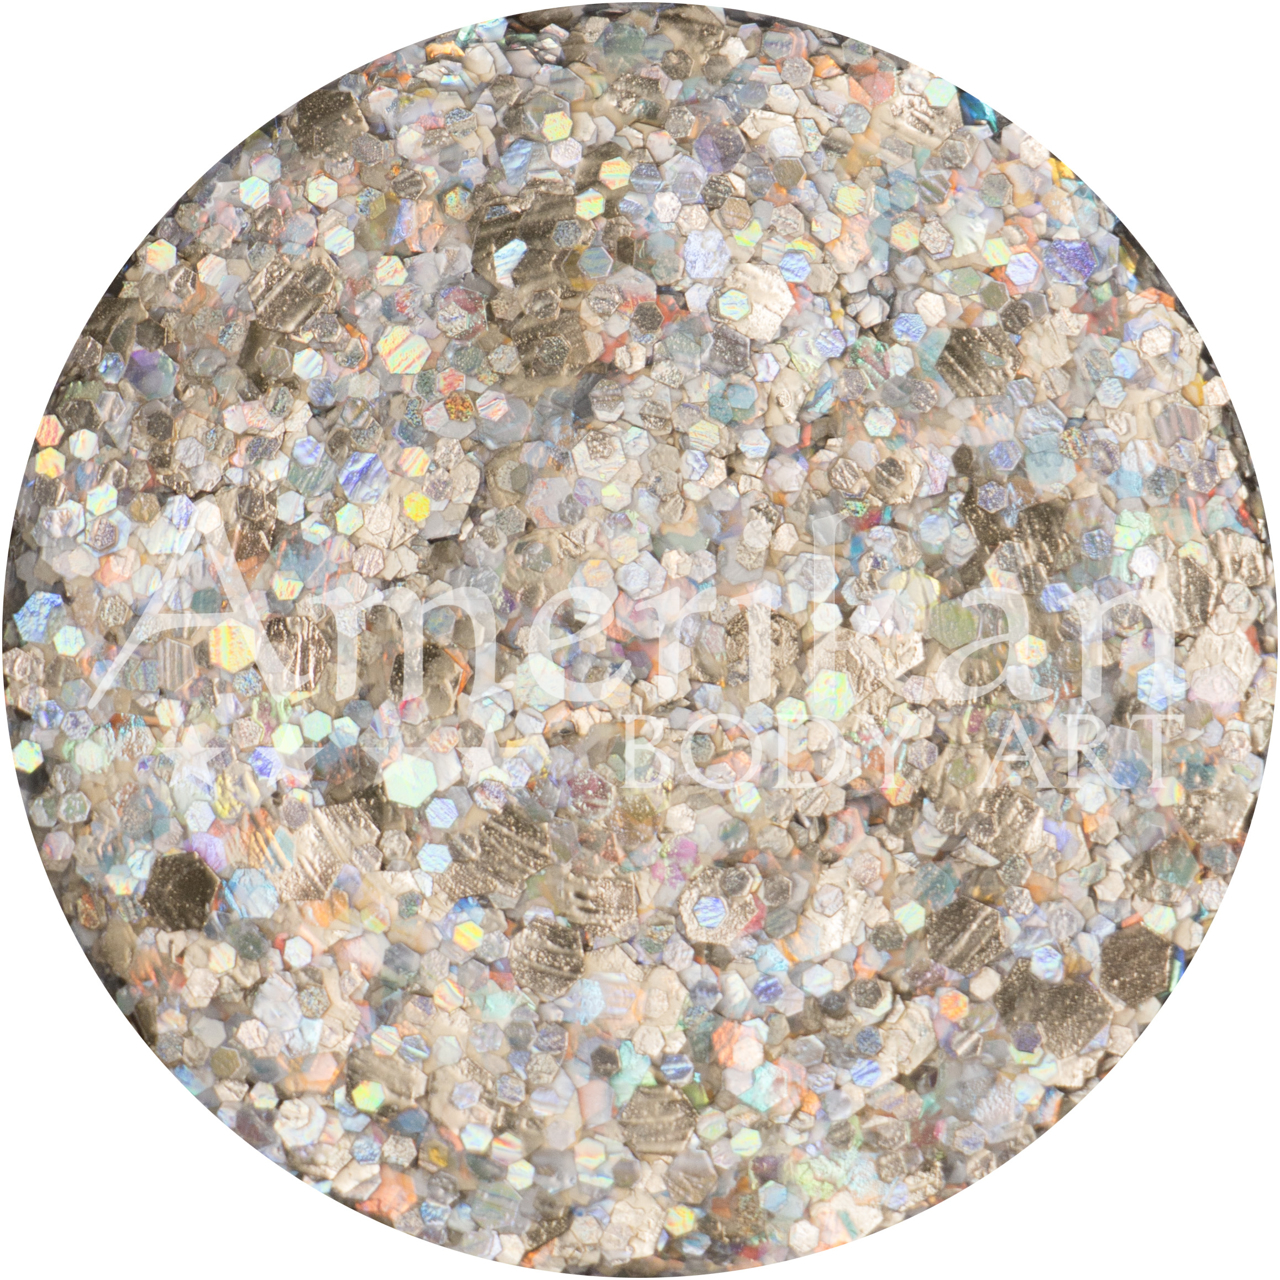 Picture of Amerikan Body Art Chunky Glitter Creme - Asteroid (15 gr)